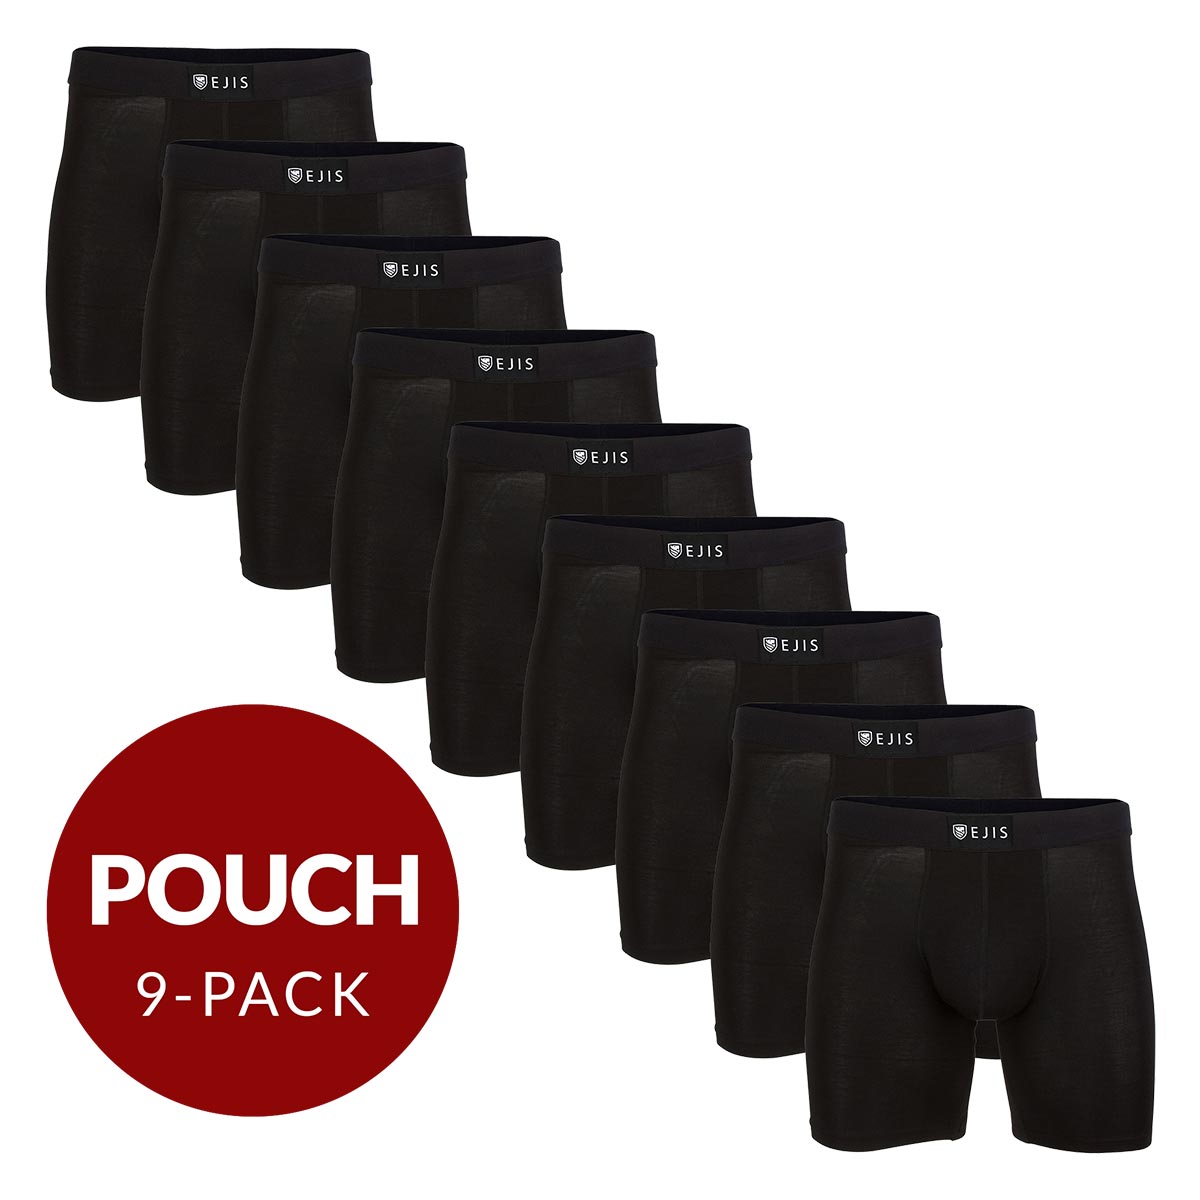 Sweat Proof Men's Boxer Briefs with Pouch - Black 9-Pack - Ejis